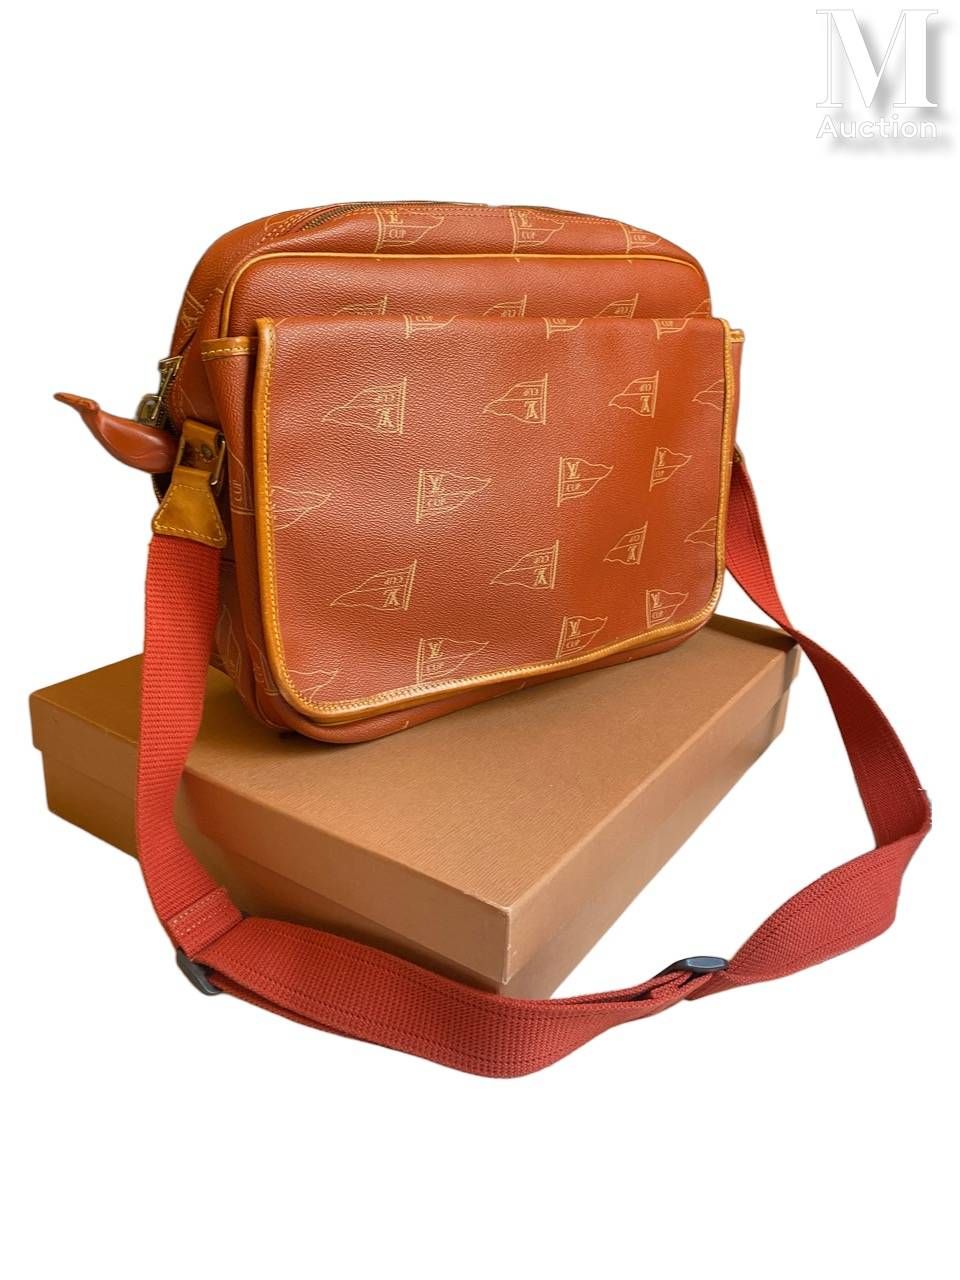 LOUIS VUITTON - 1990's Collection "America's Cup" BAG
in red Monogram canvas and&hellip;